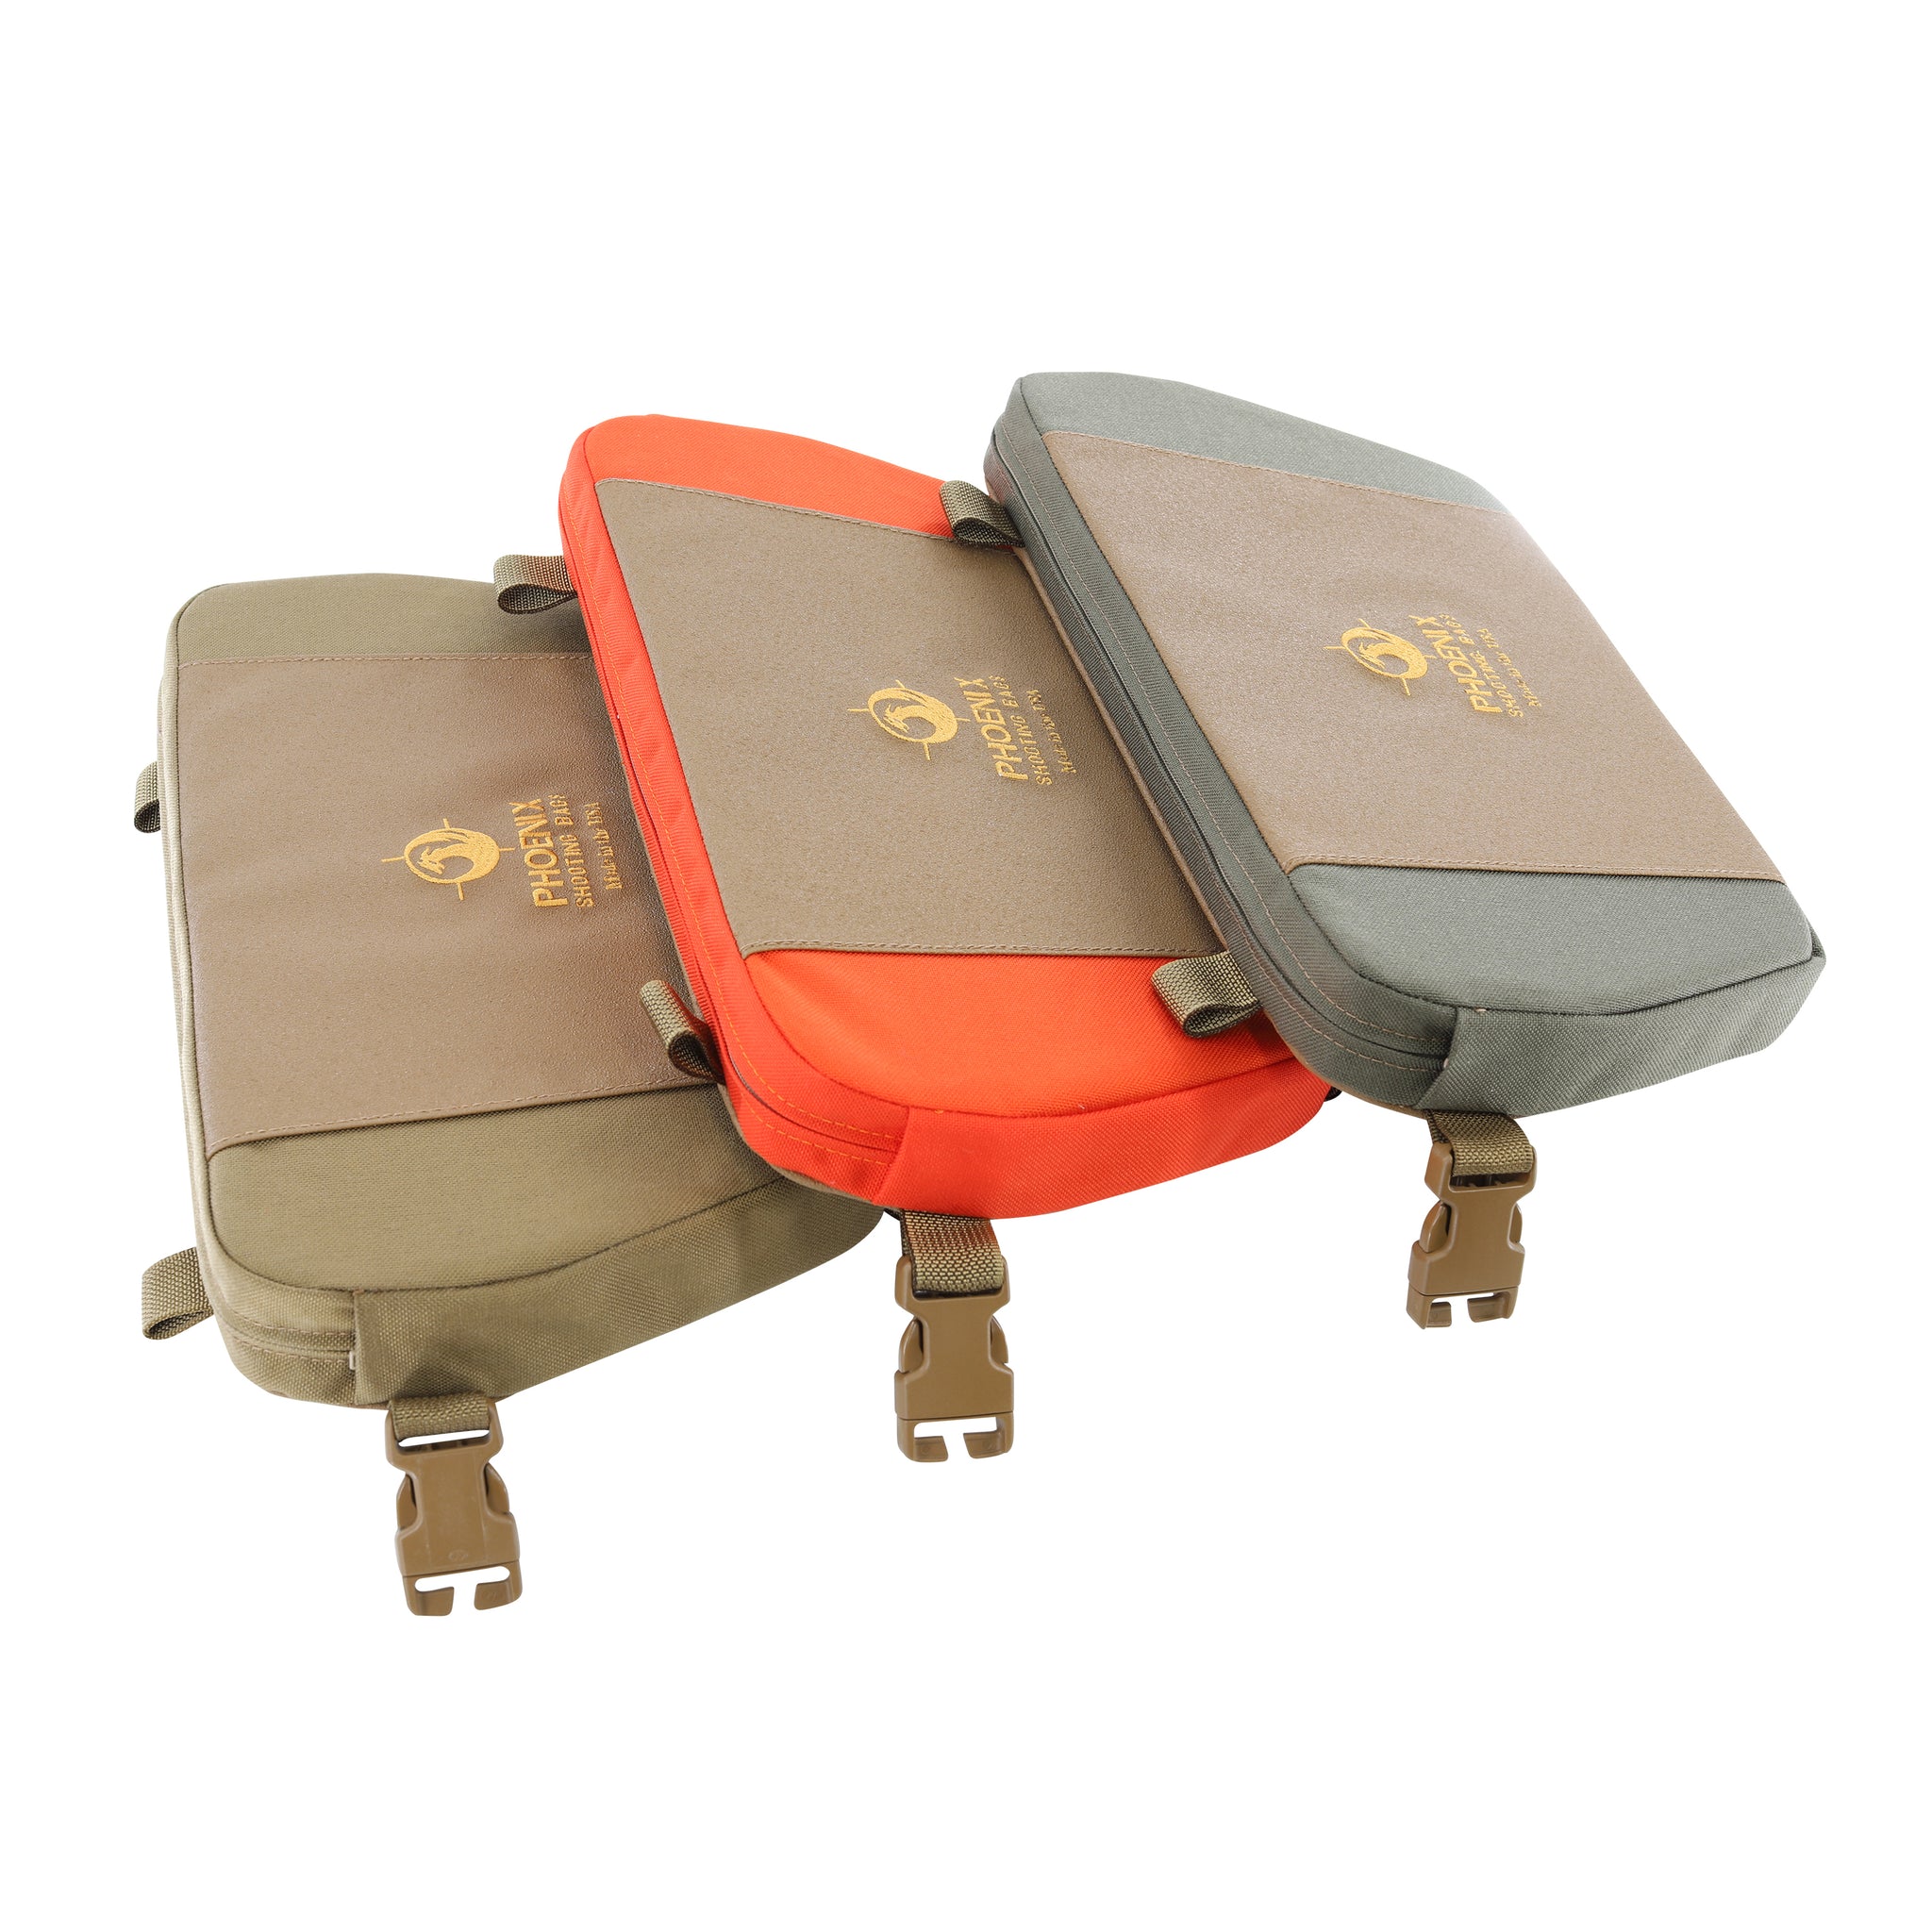 The Best Glassing Pad For Hunting. 